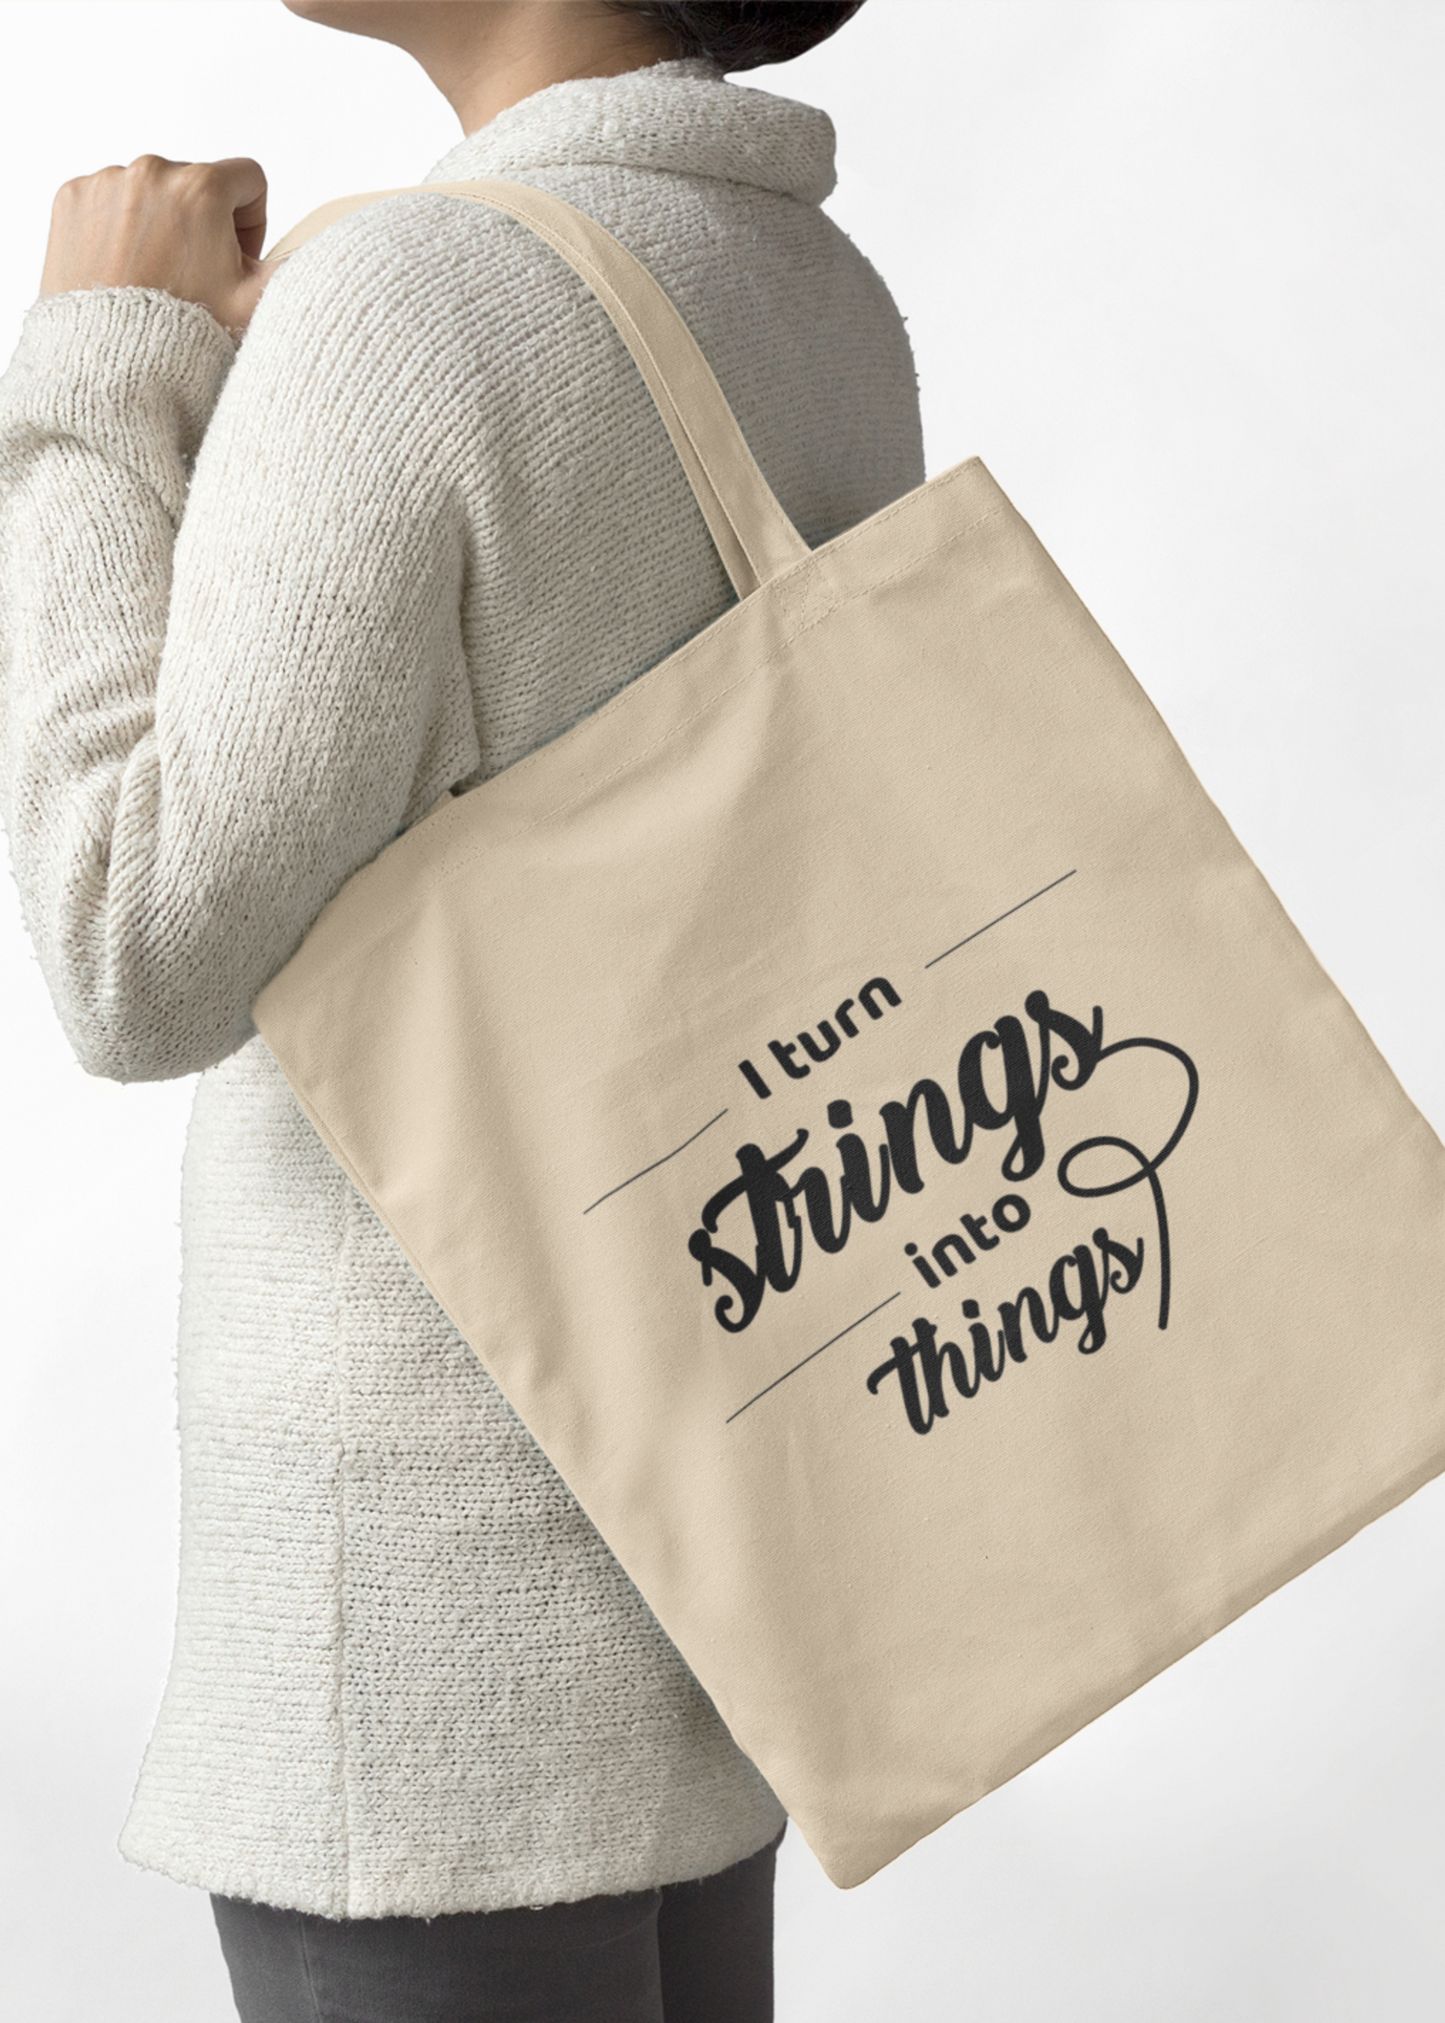 "I Turn Strings Into Things" Tote